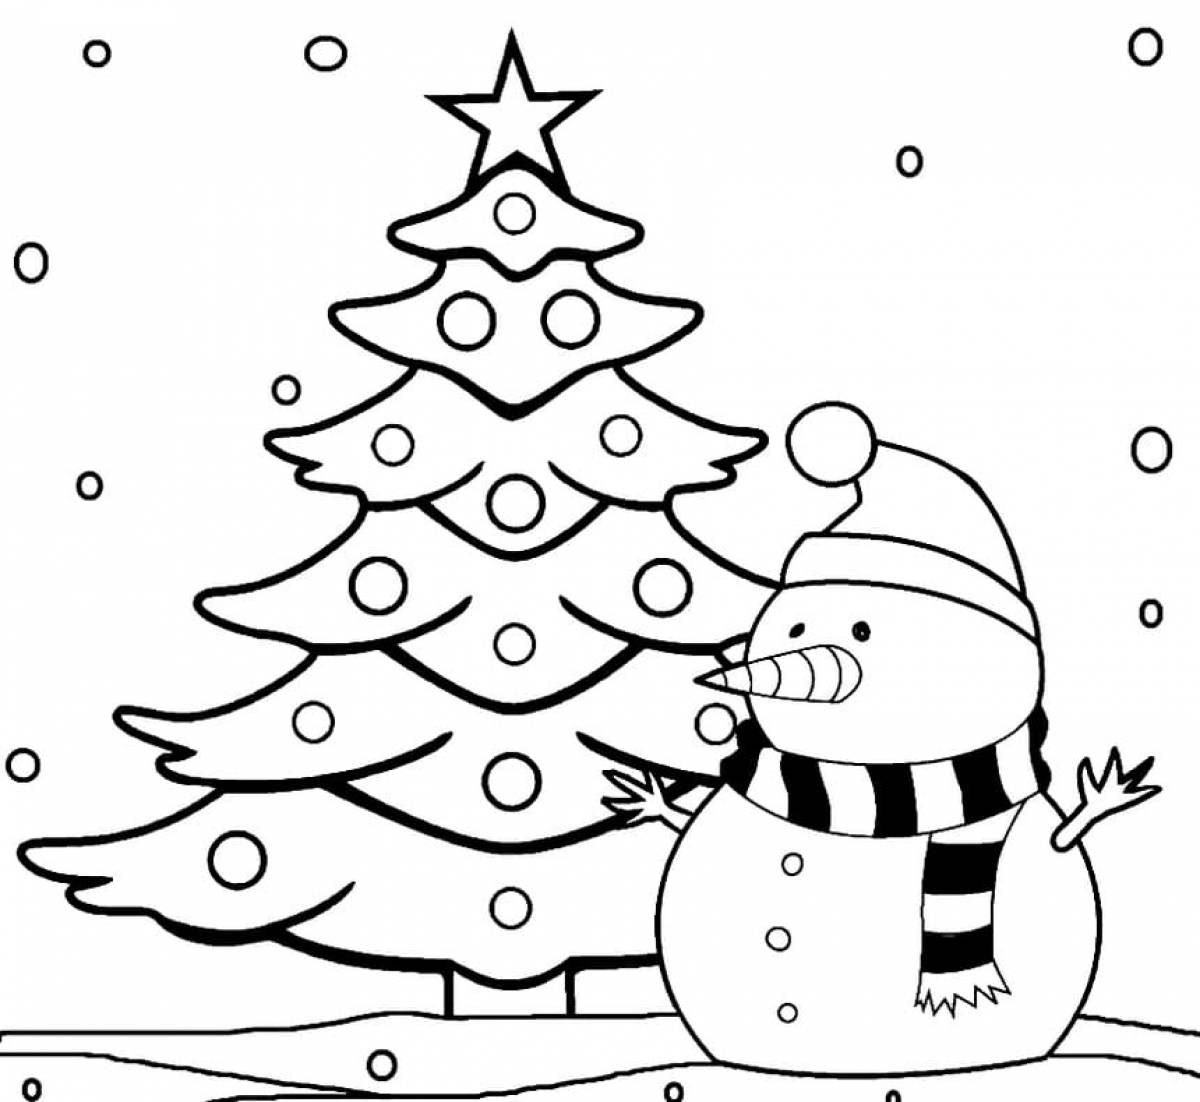 Tree and snowman #7